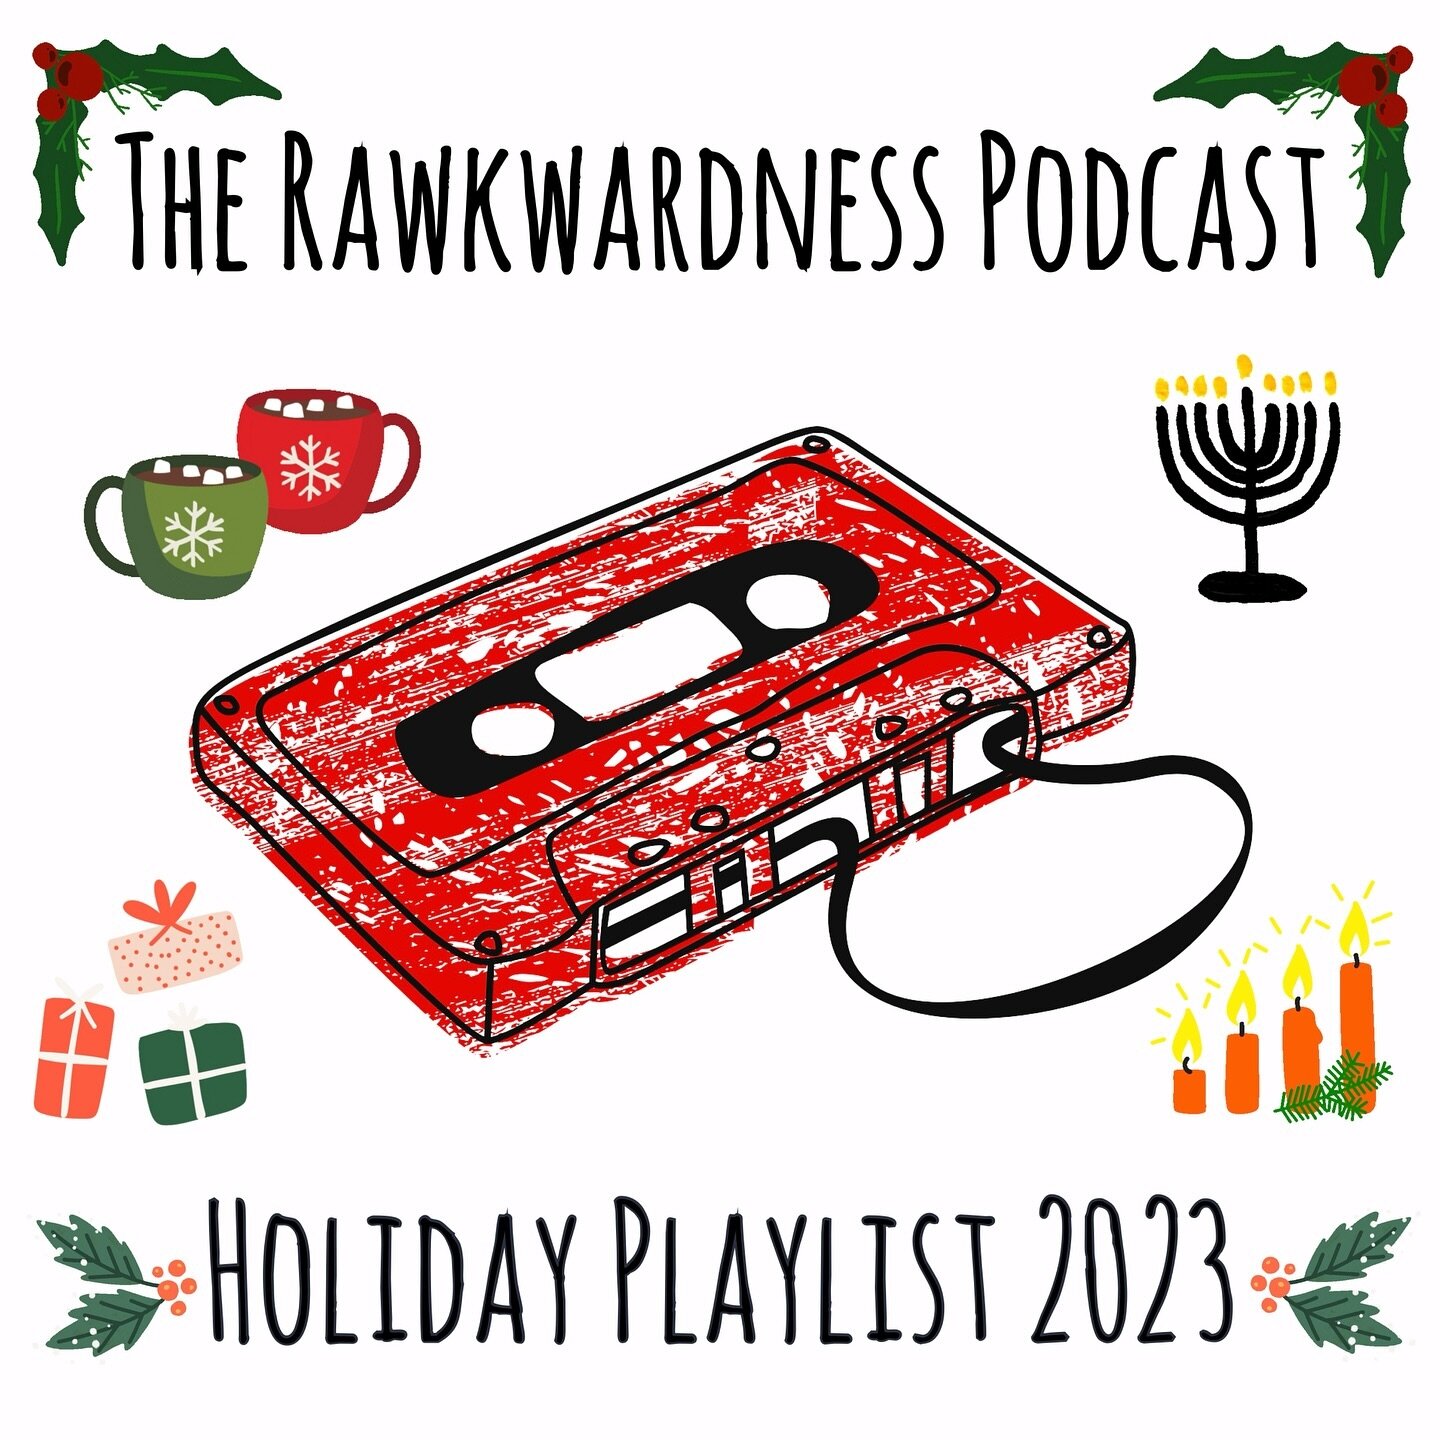 Hello holidays! I spent way way way too much time making this super sick winter holiday playlist with guests, friends of the pod, and other favorites. Please enjoy! Link in bio

#happyholidays #holidayplaylist #indiechristmas